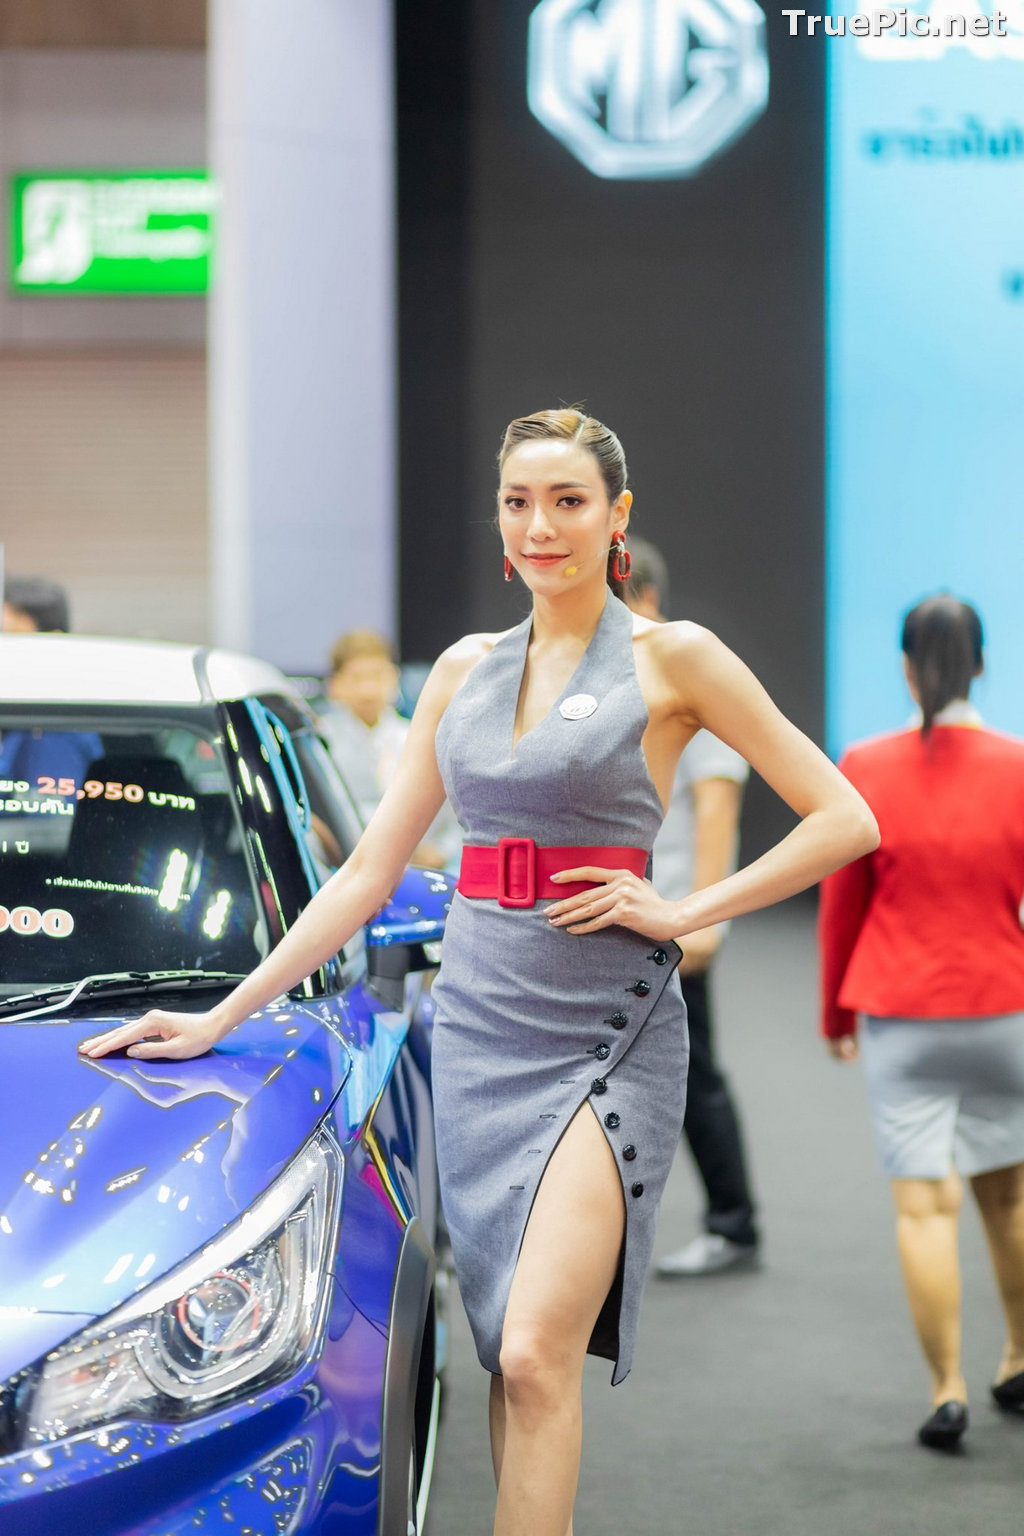 Image Thailand Racing Model at BIG Motor Sale 2019 - TruePic.net - Picture-24